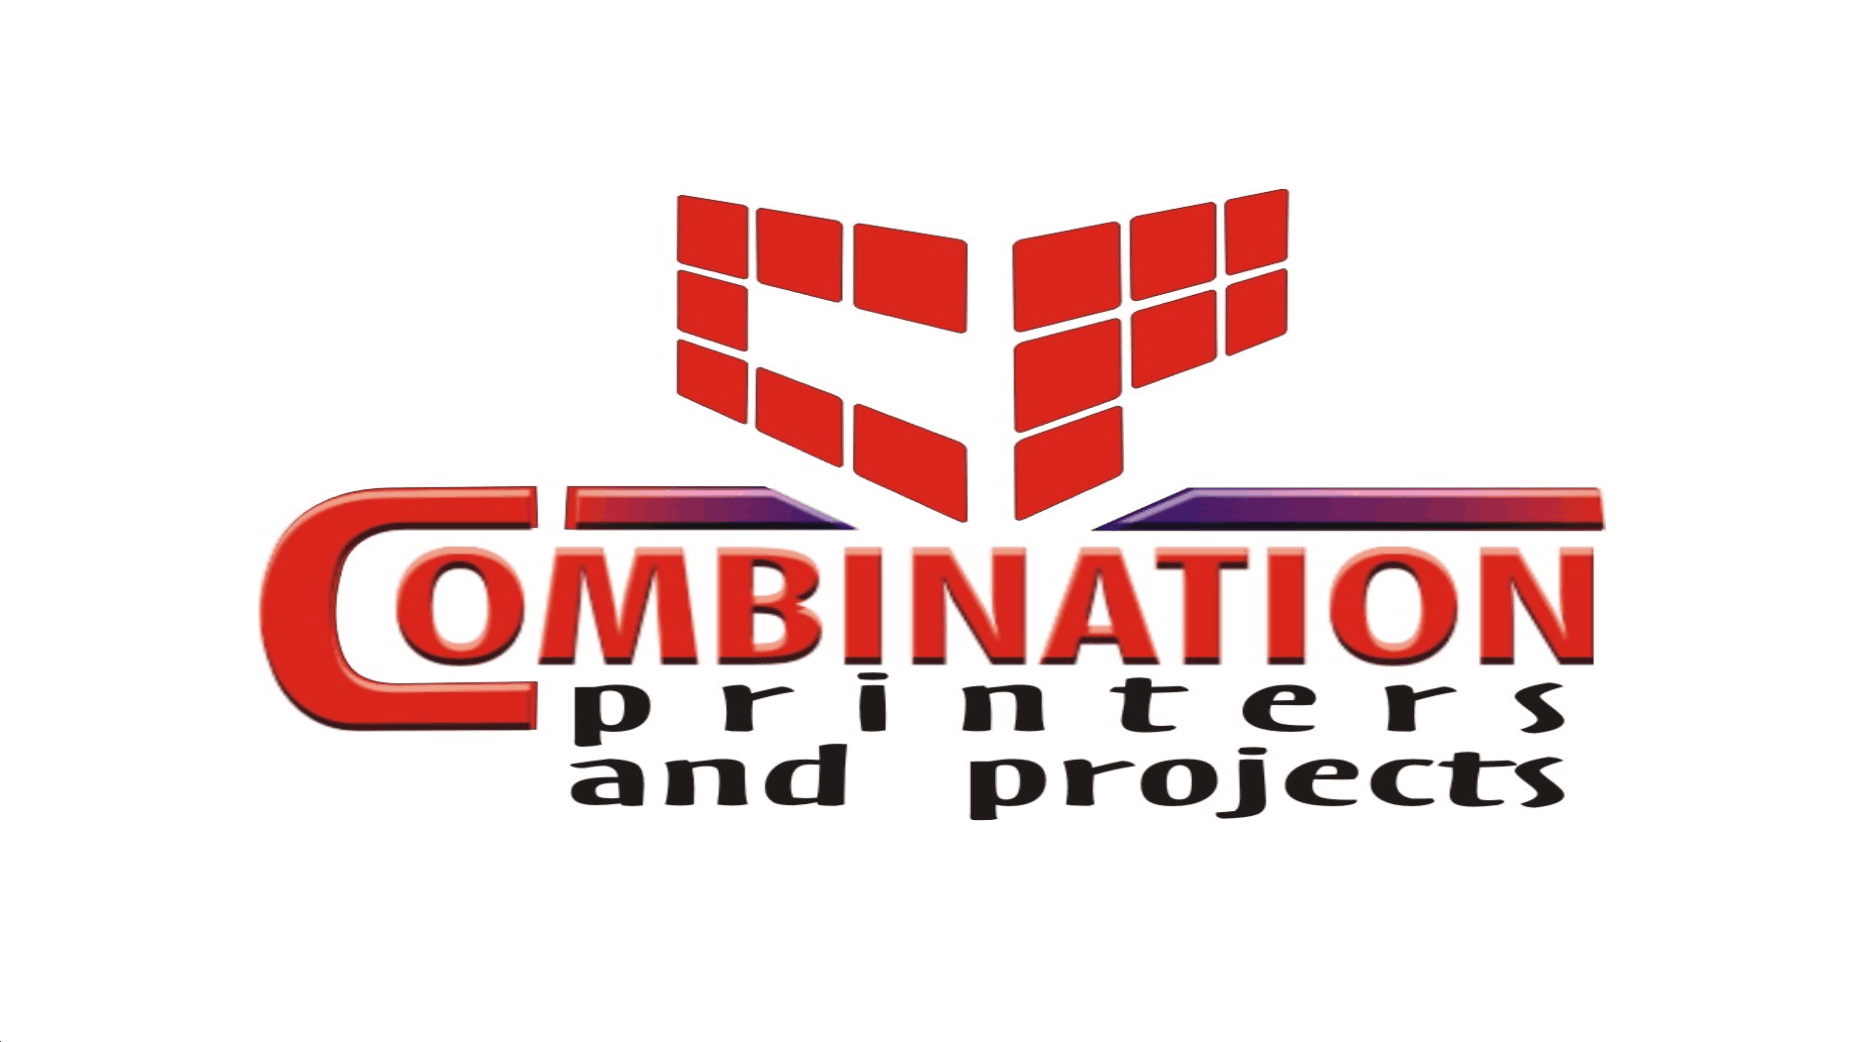 Combination Printers hosted by Kaamoso Web Group